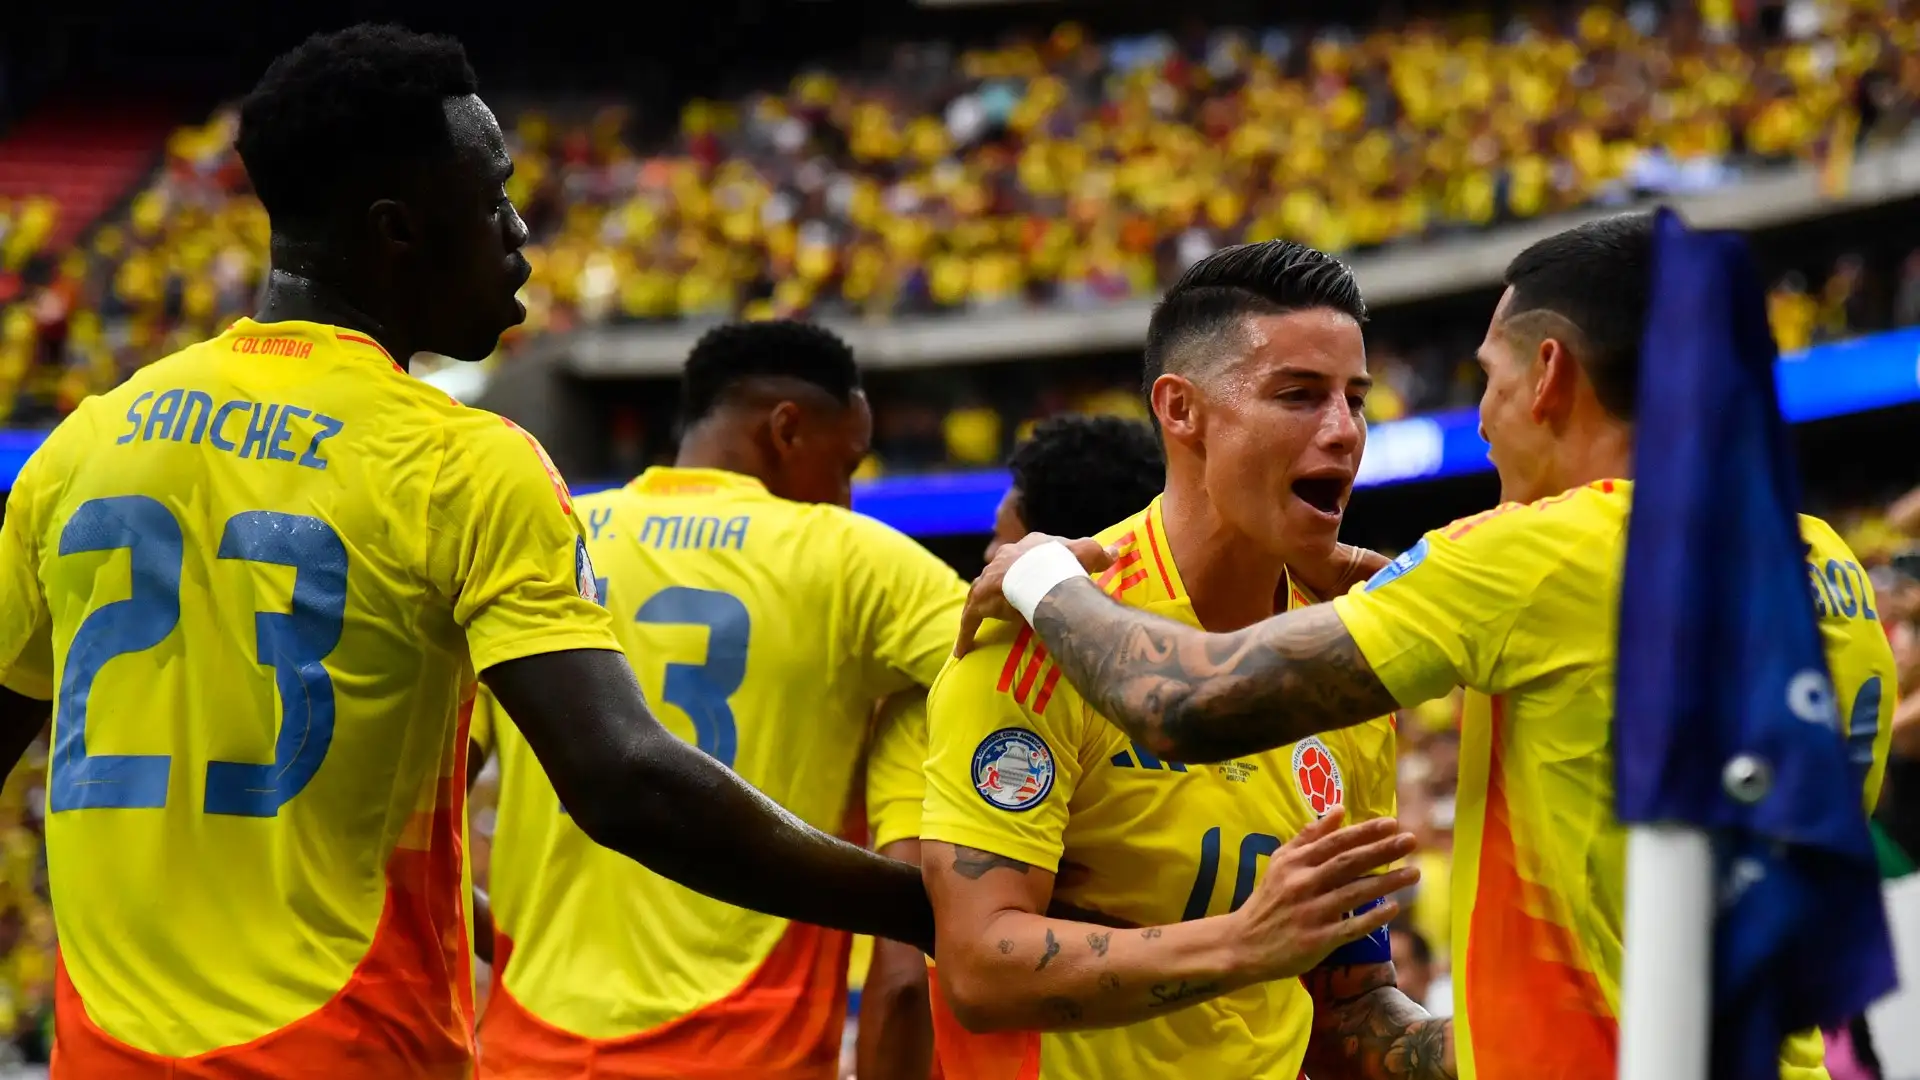 Colombia’s victorious start in Copa América